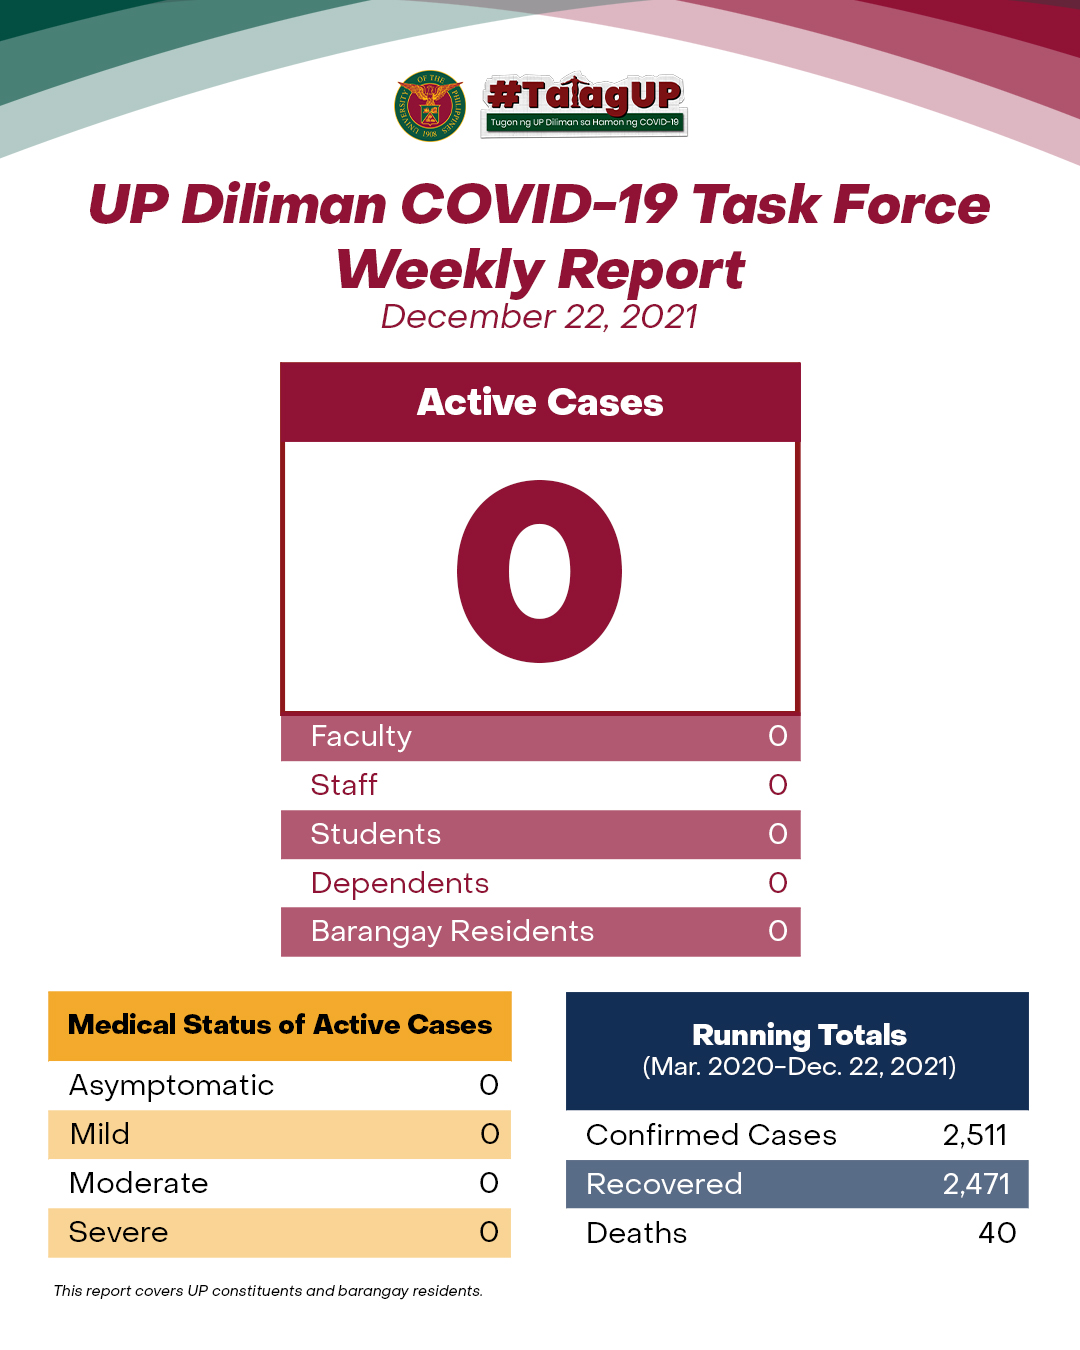 UP Diliman COVID-19 Task Force Weekly Report (December 22, 2021)